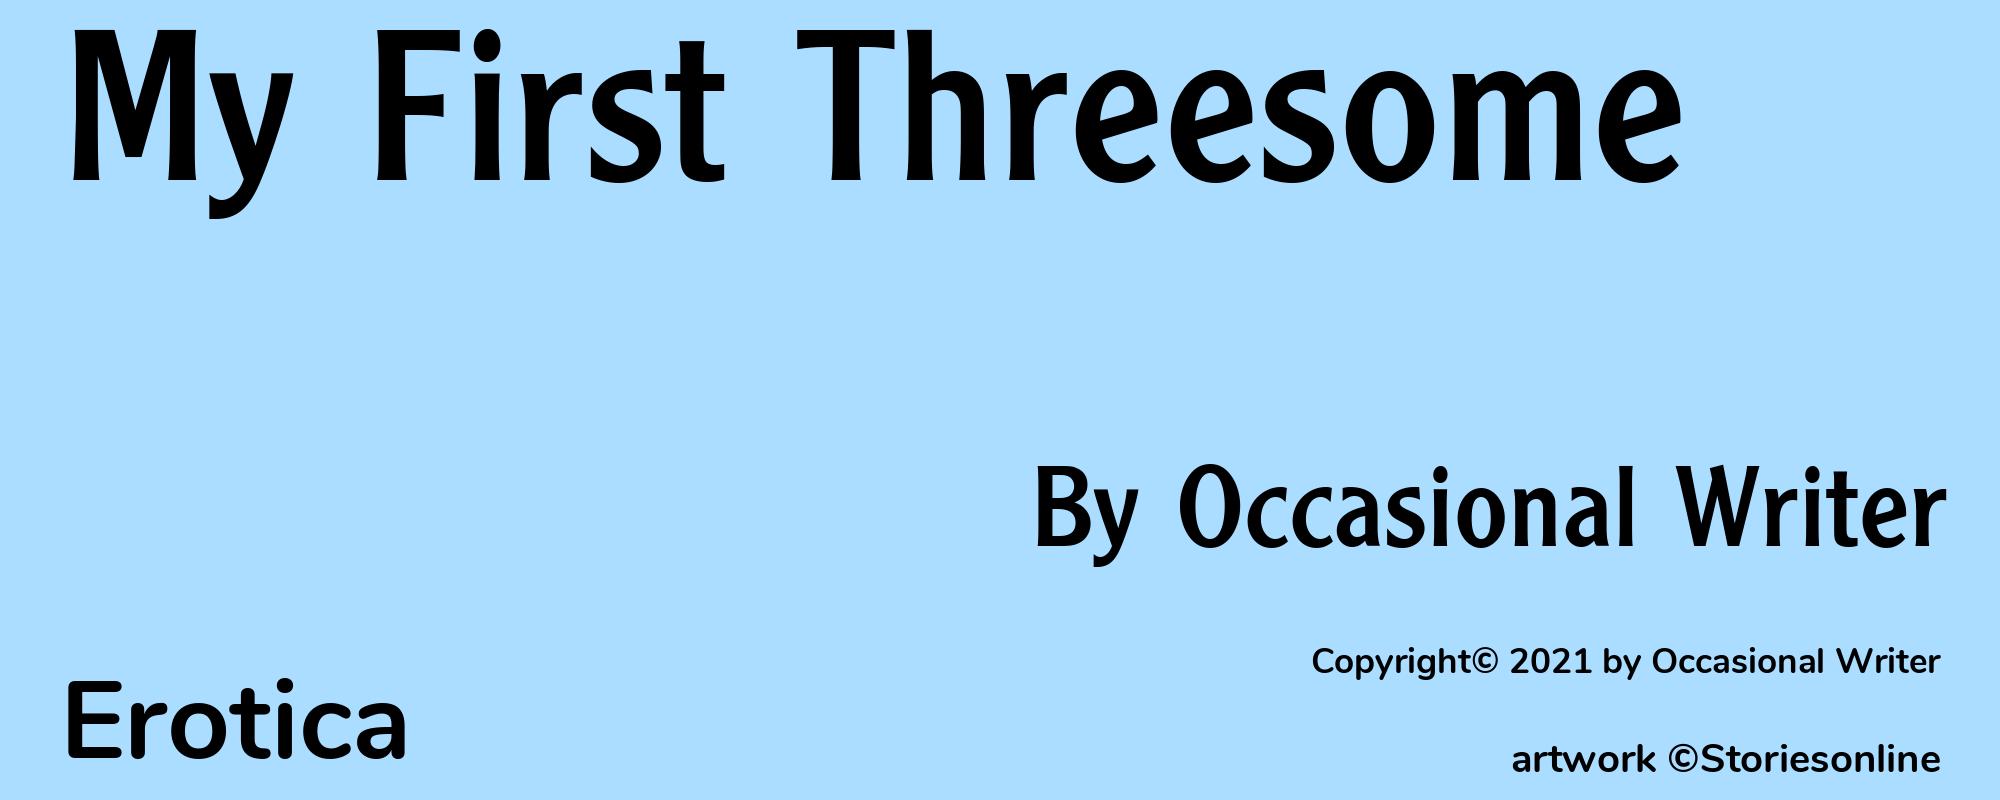 My First Threesome - Cover